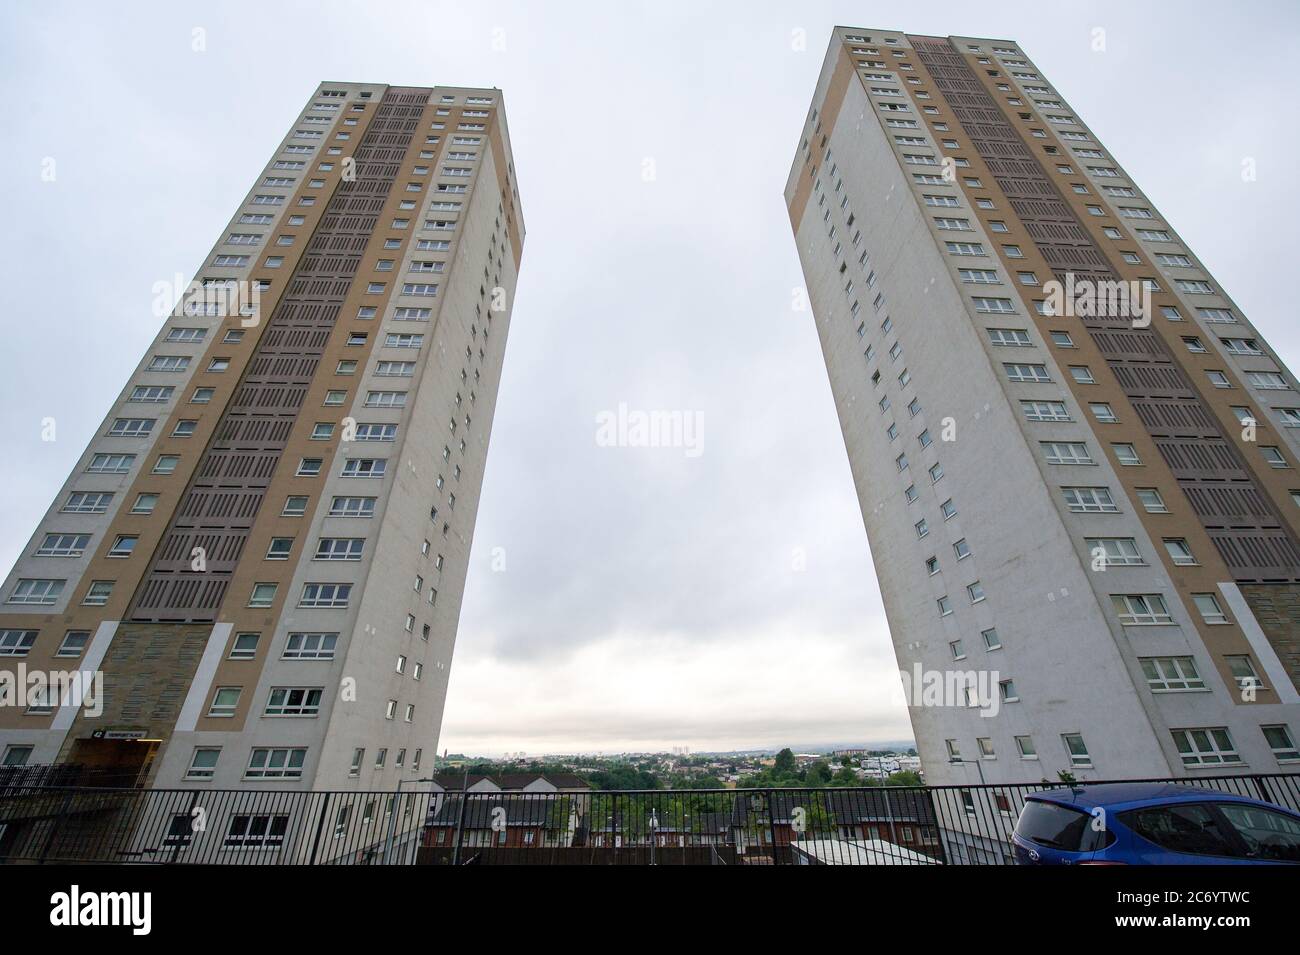 Glasgow Scotland, UK. 13th July, 2020. Pictured: High-rise Flats in Stobhill area of Glasgow reach high into the sky seemingly scratching the underside of the dense grey cloud base which hangs over the whole of Glasgow this morning. Credit: Colin Fisher/Alamy Live News Stock Photo